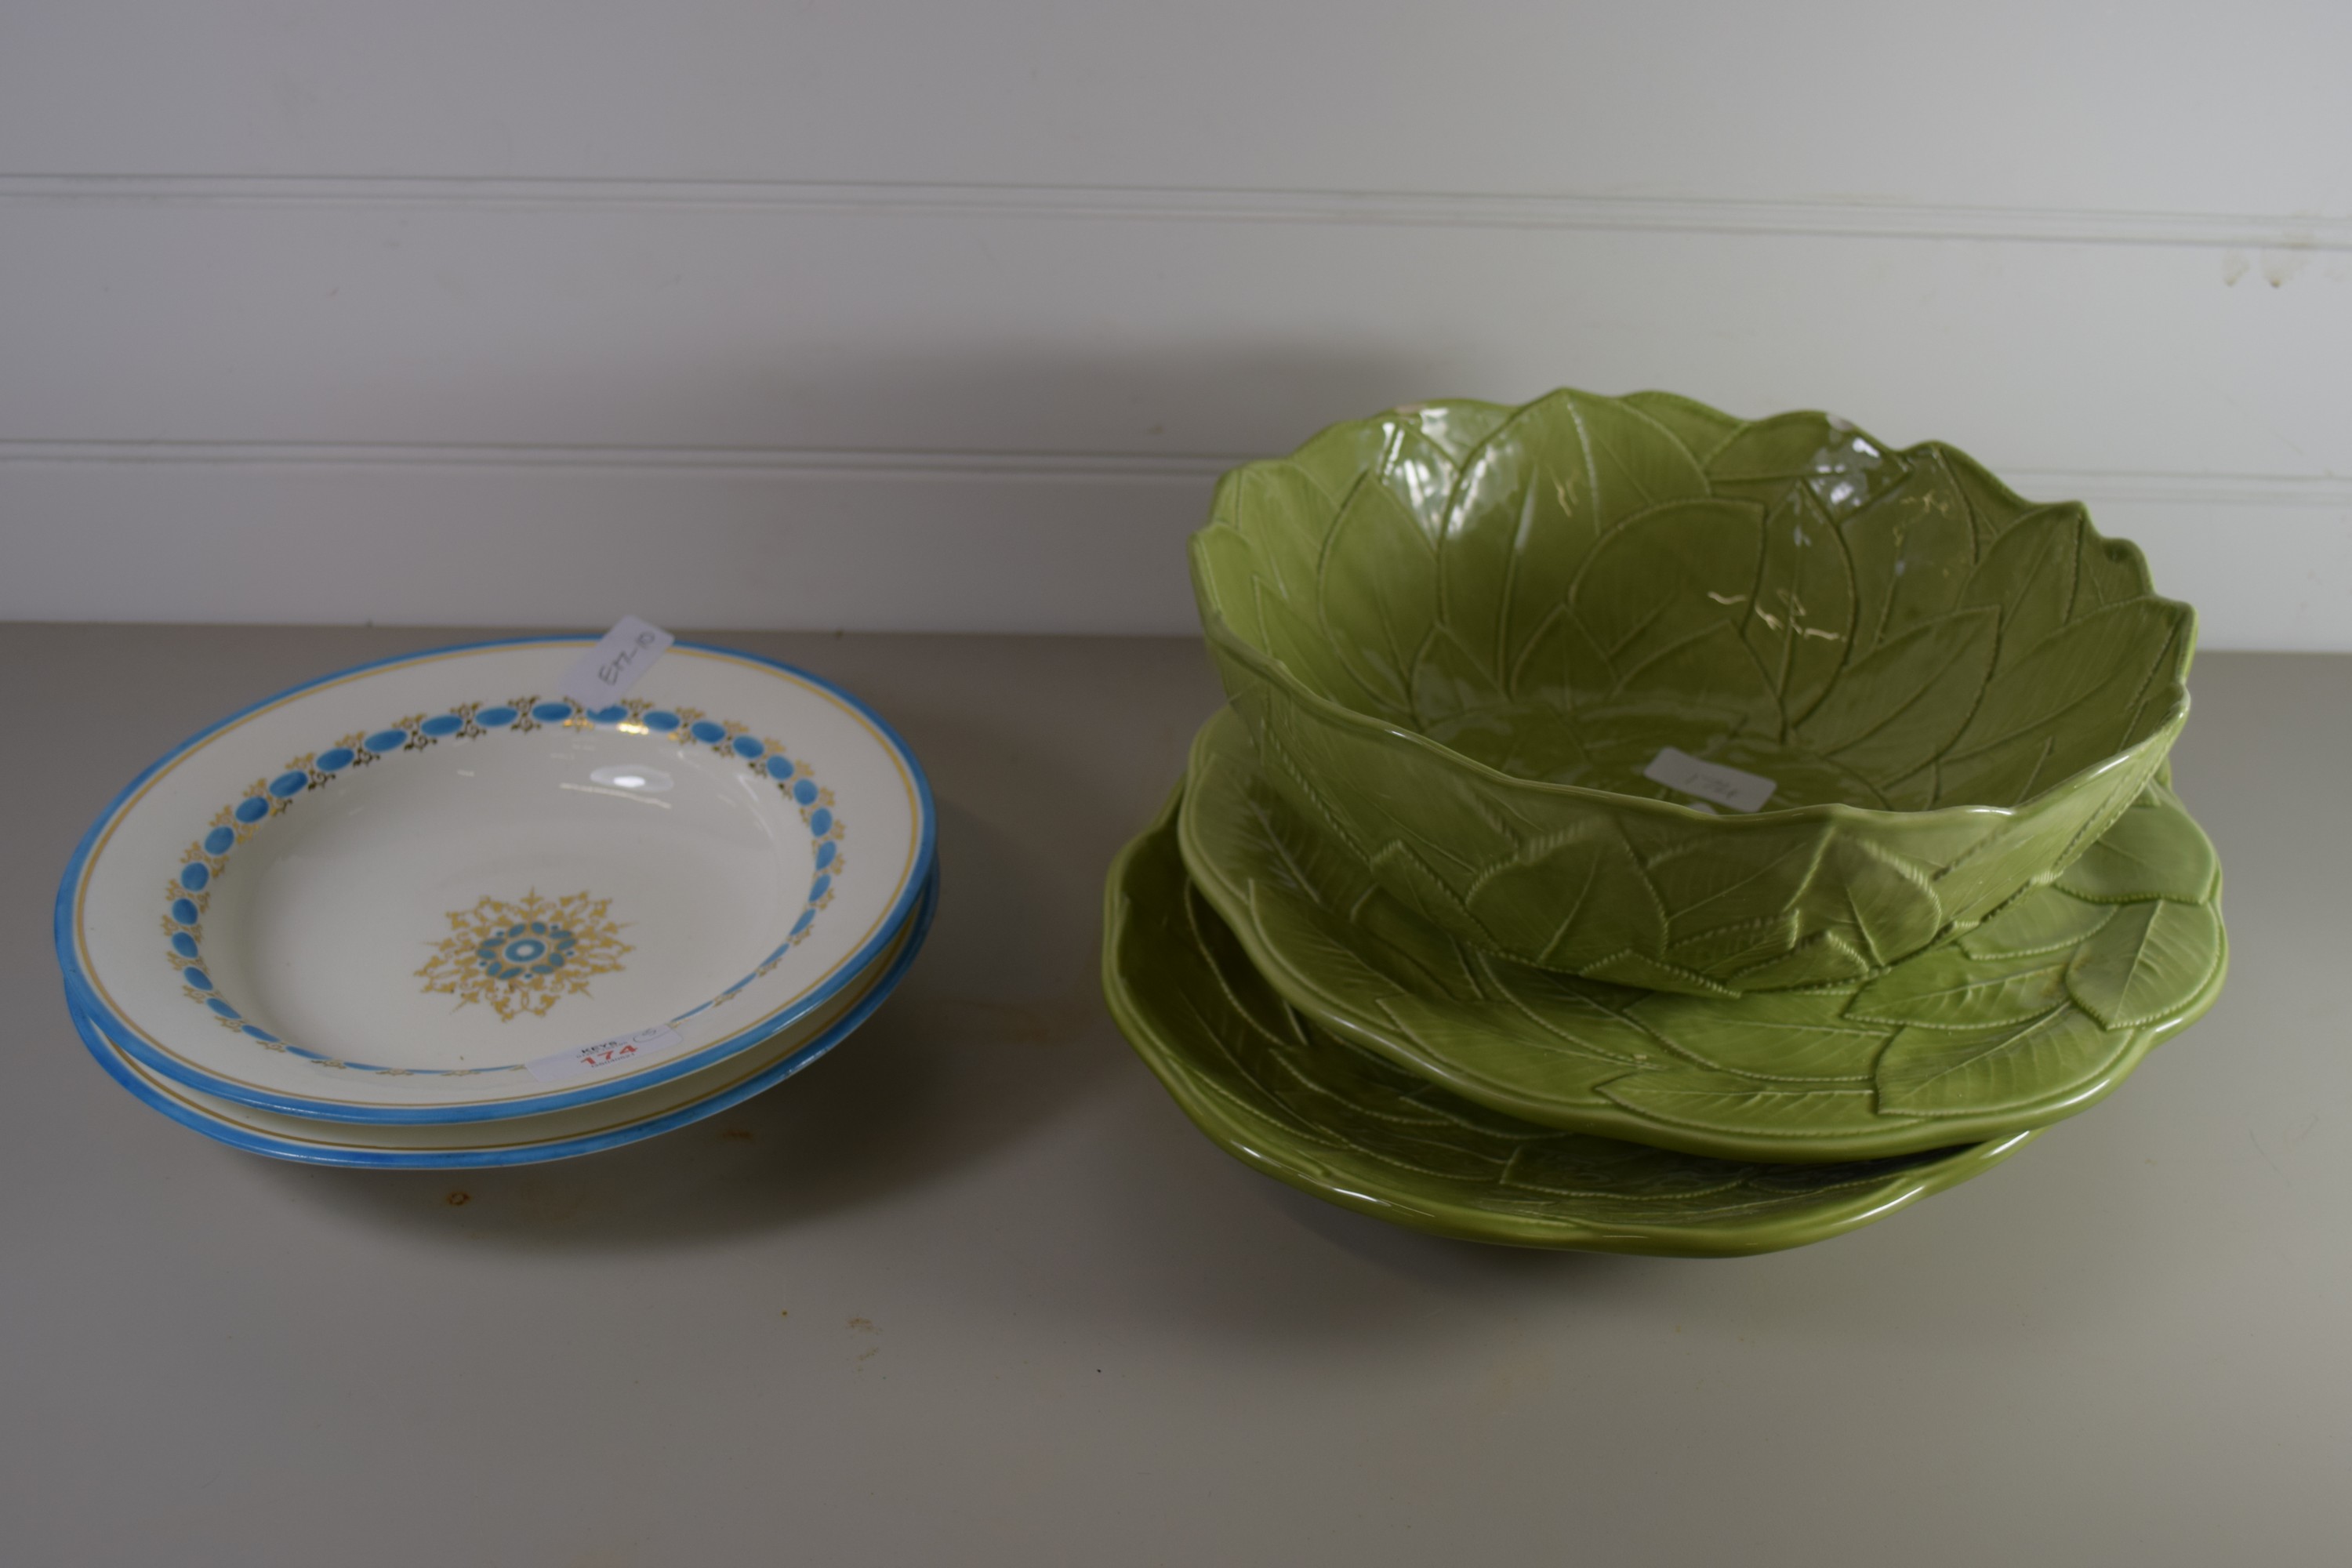 CERAMIC ITEMS, SERVING BOWLS AND GREEN GLAZED SERVING DISHES